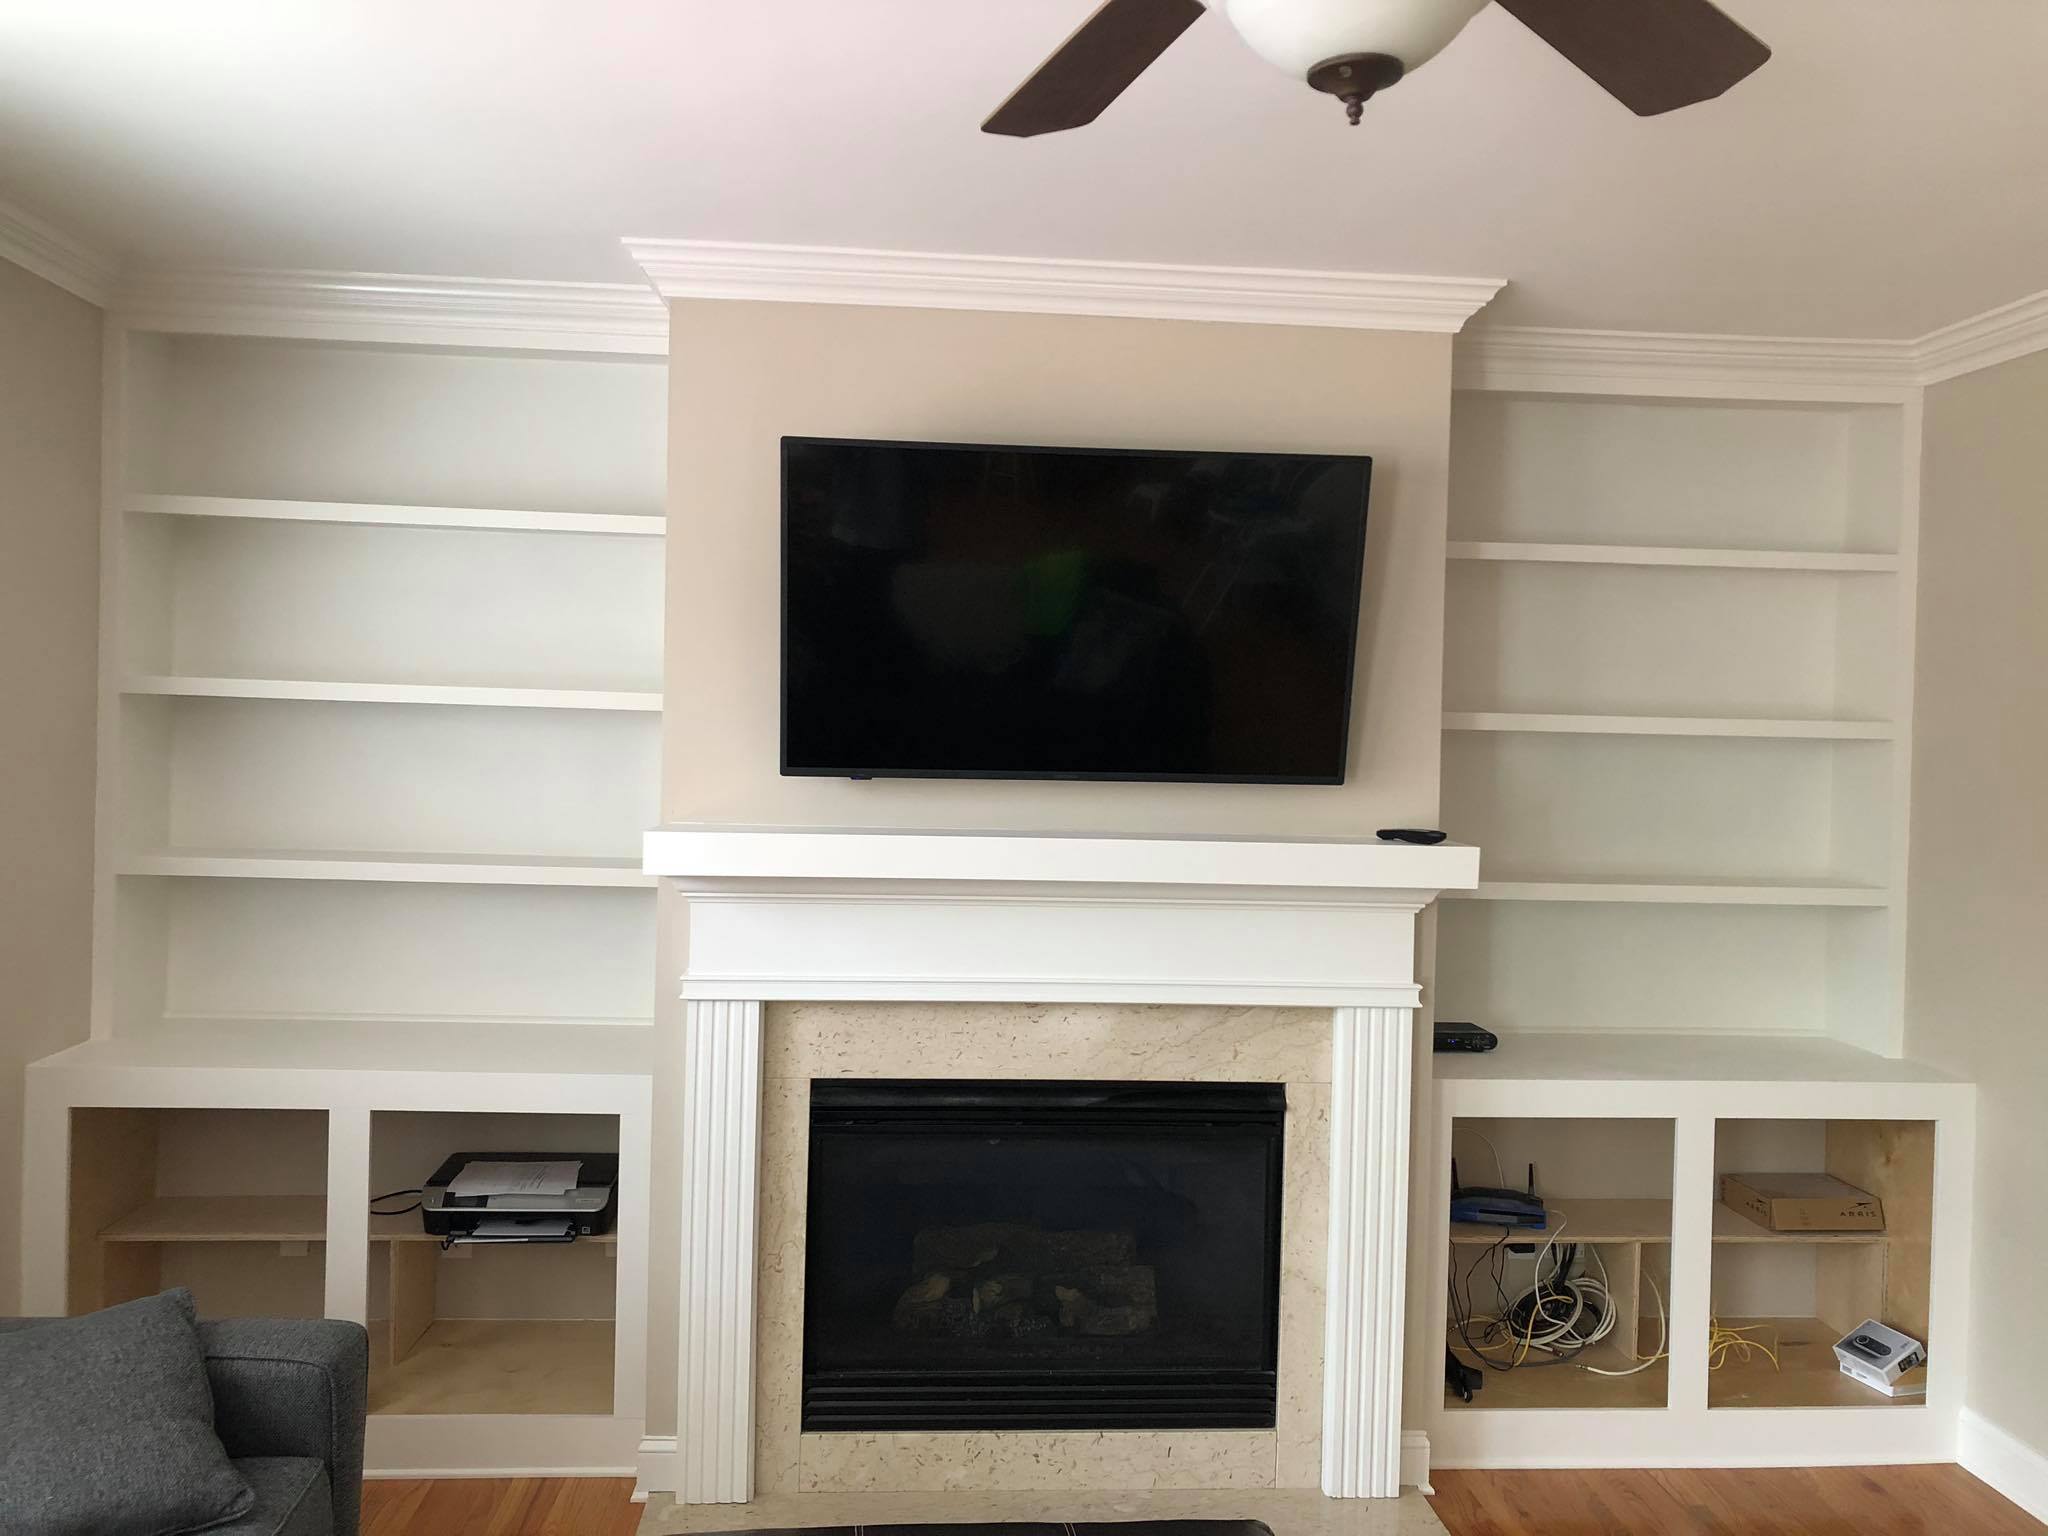 Fireplace Entertainment Center with Floating Shelves and Double Door Cabinets Front View